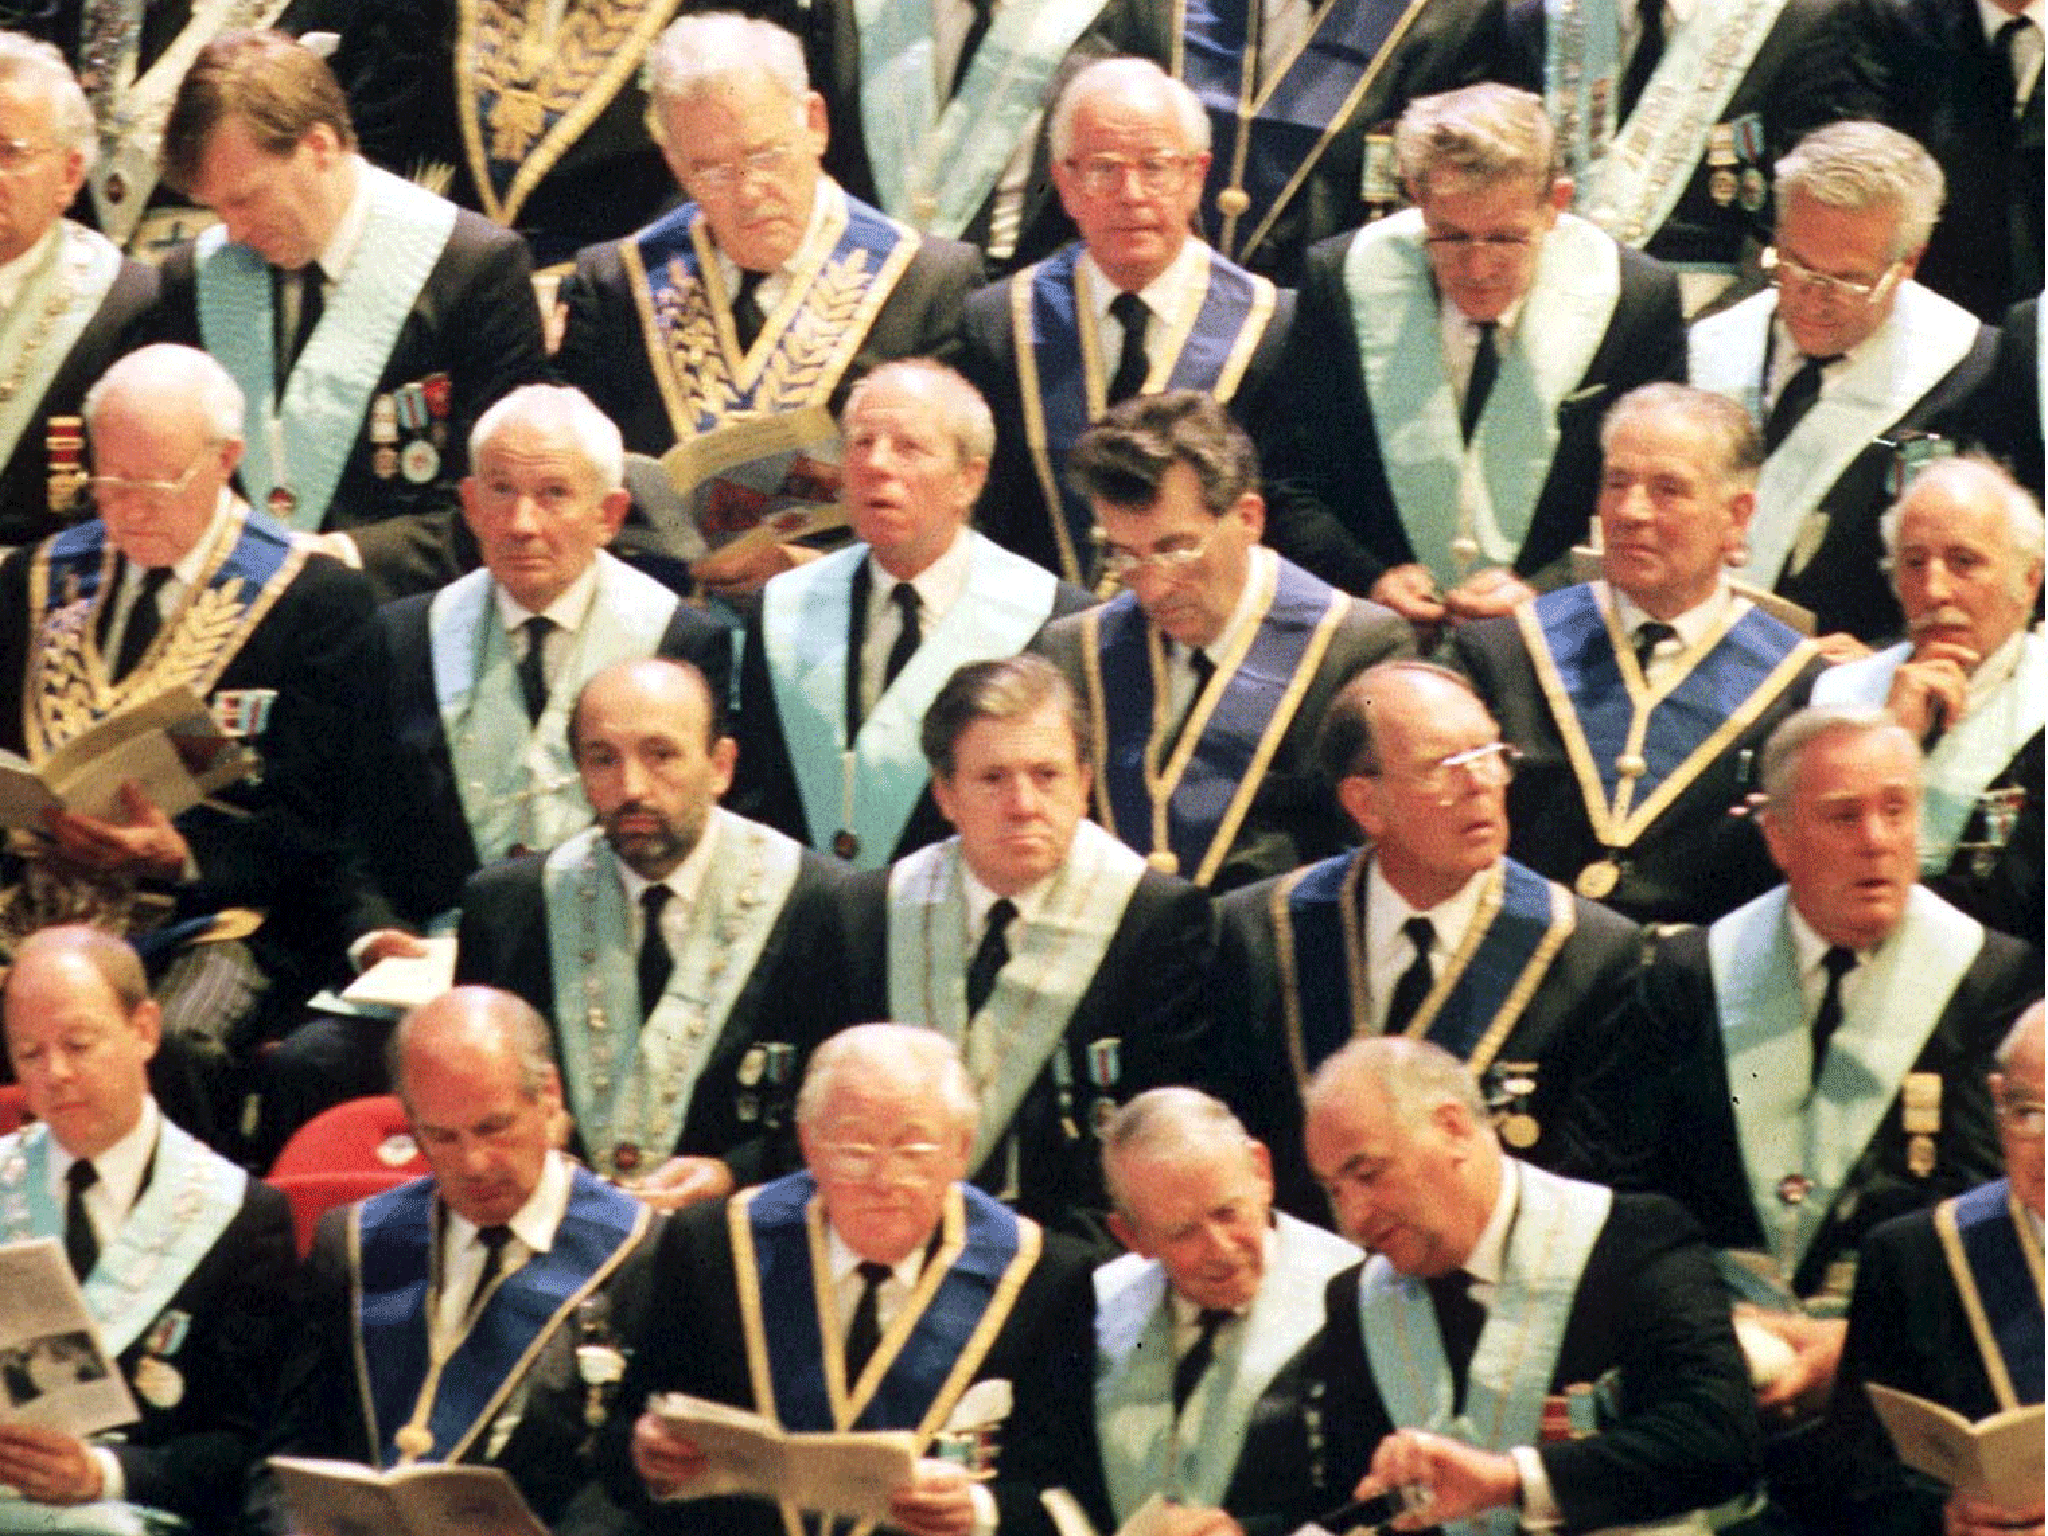 Freemasons gather at Earls Court in 1992 to celebrate the 275th anniversary of the formation of the first Grand Lodge